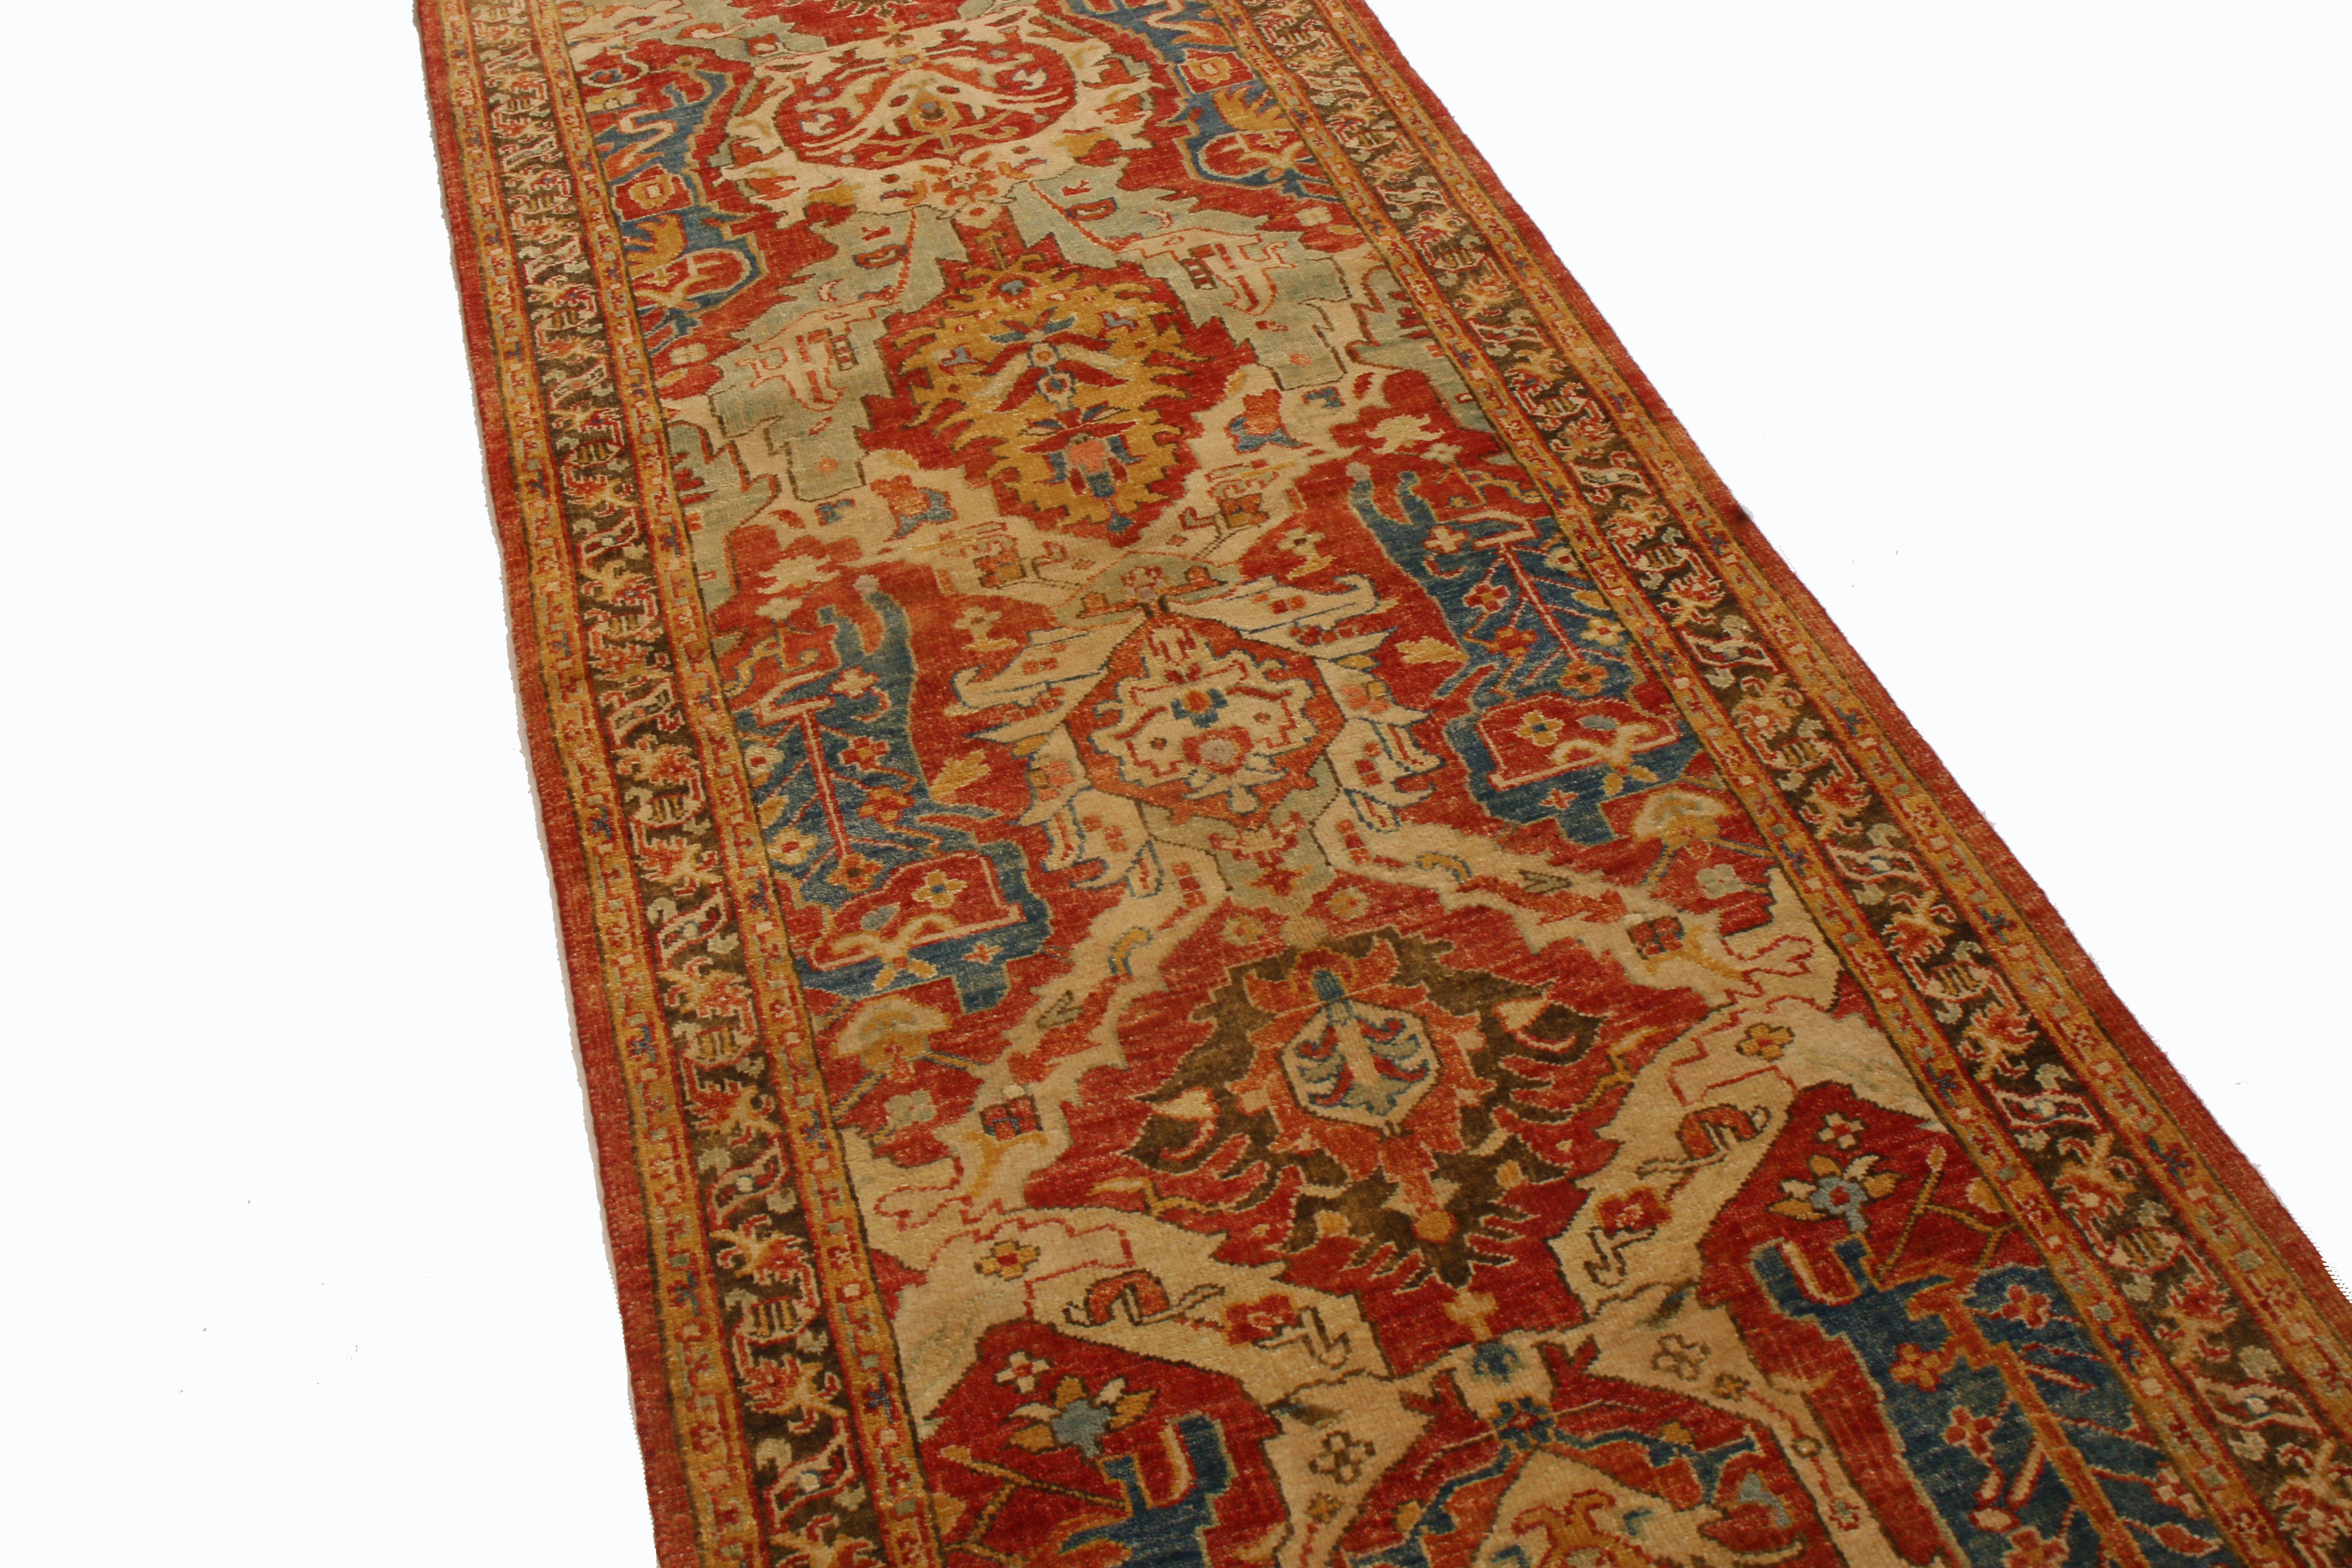 Originating from India in the 2010s, this new Agra wool runner features interesting complementary symbols in its field design. Hand knotted in high-quality wool, the field design employs a vertically symmetrical tower of lotus, palmette, and tree